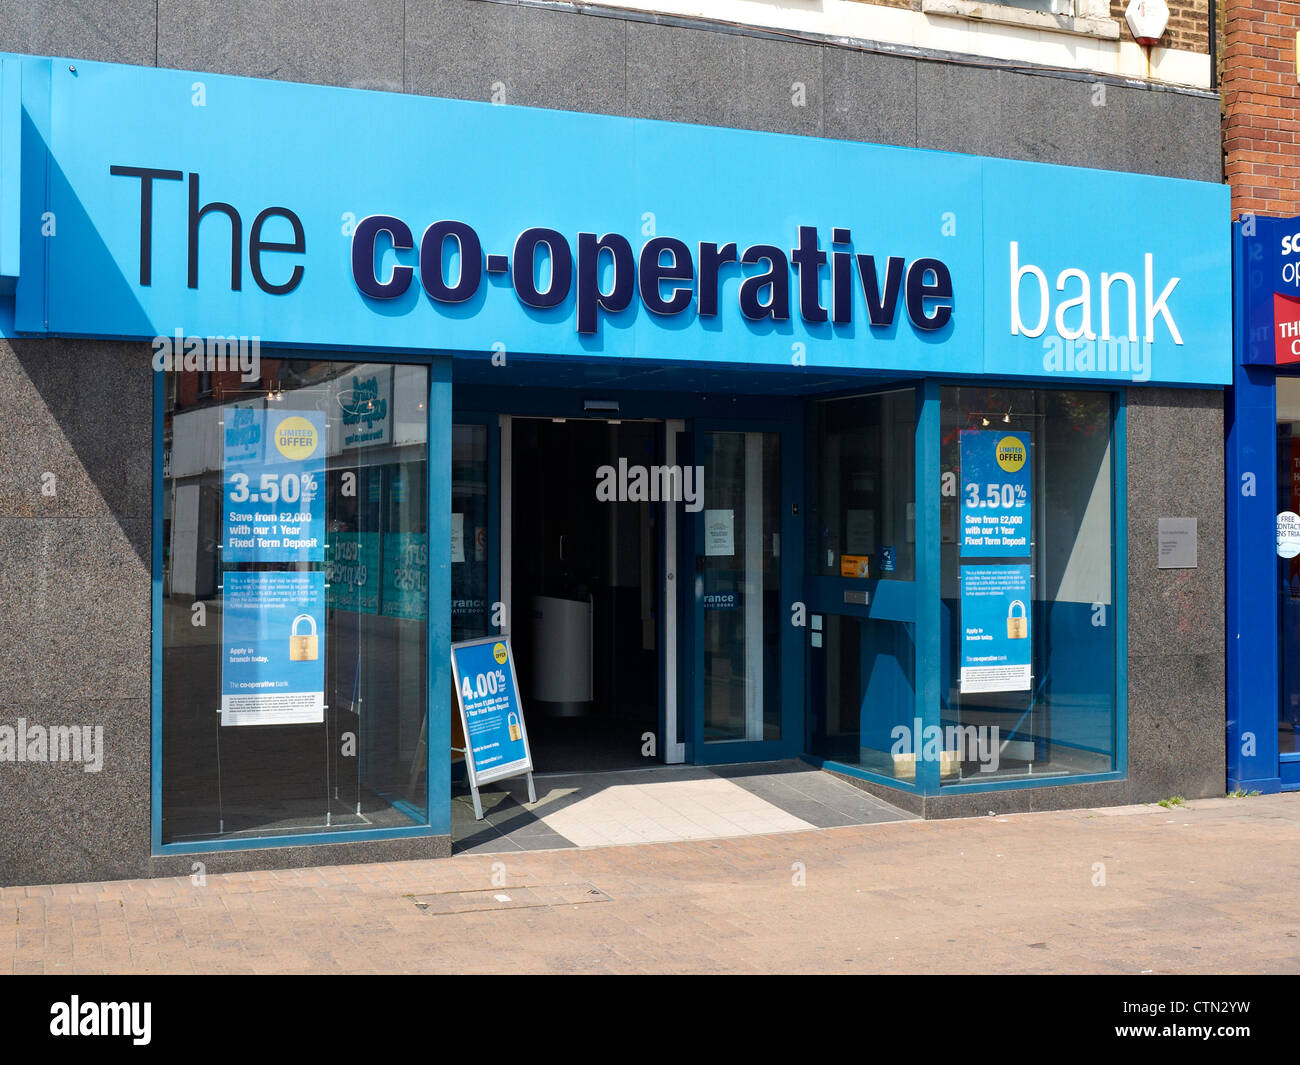 The Co-ooperative bank in Crewe Cheshire UK Stock Photo